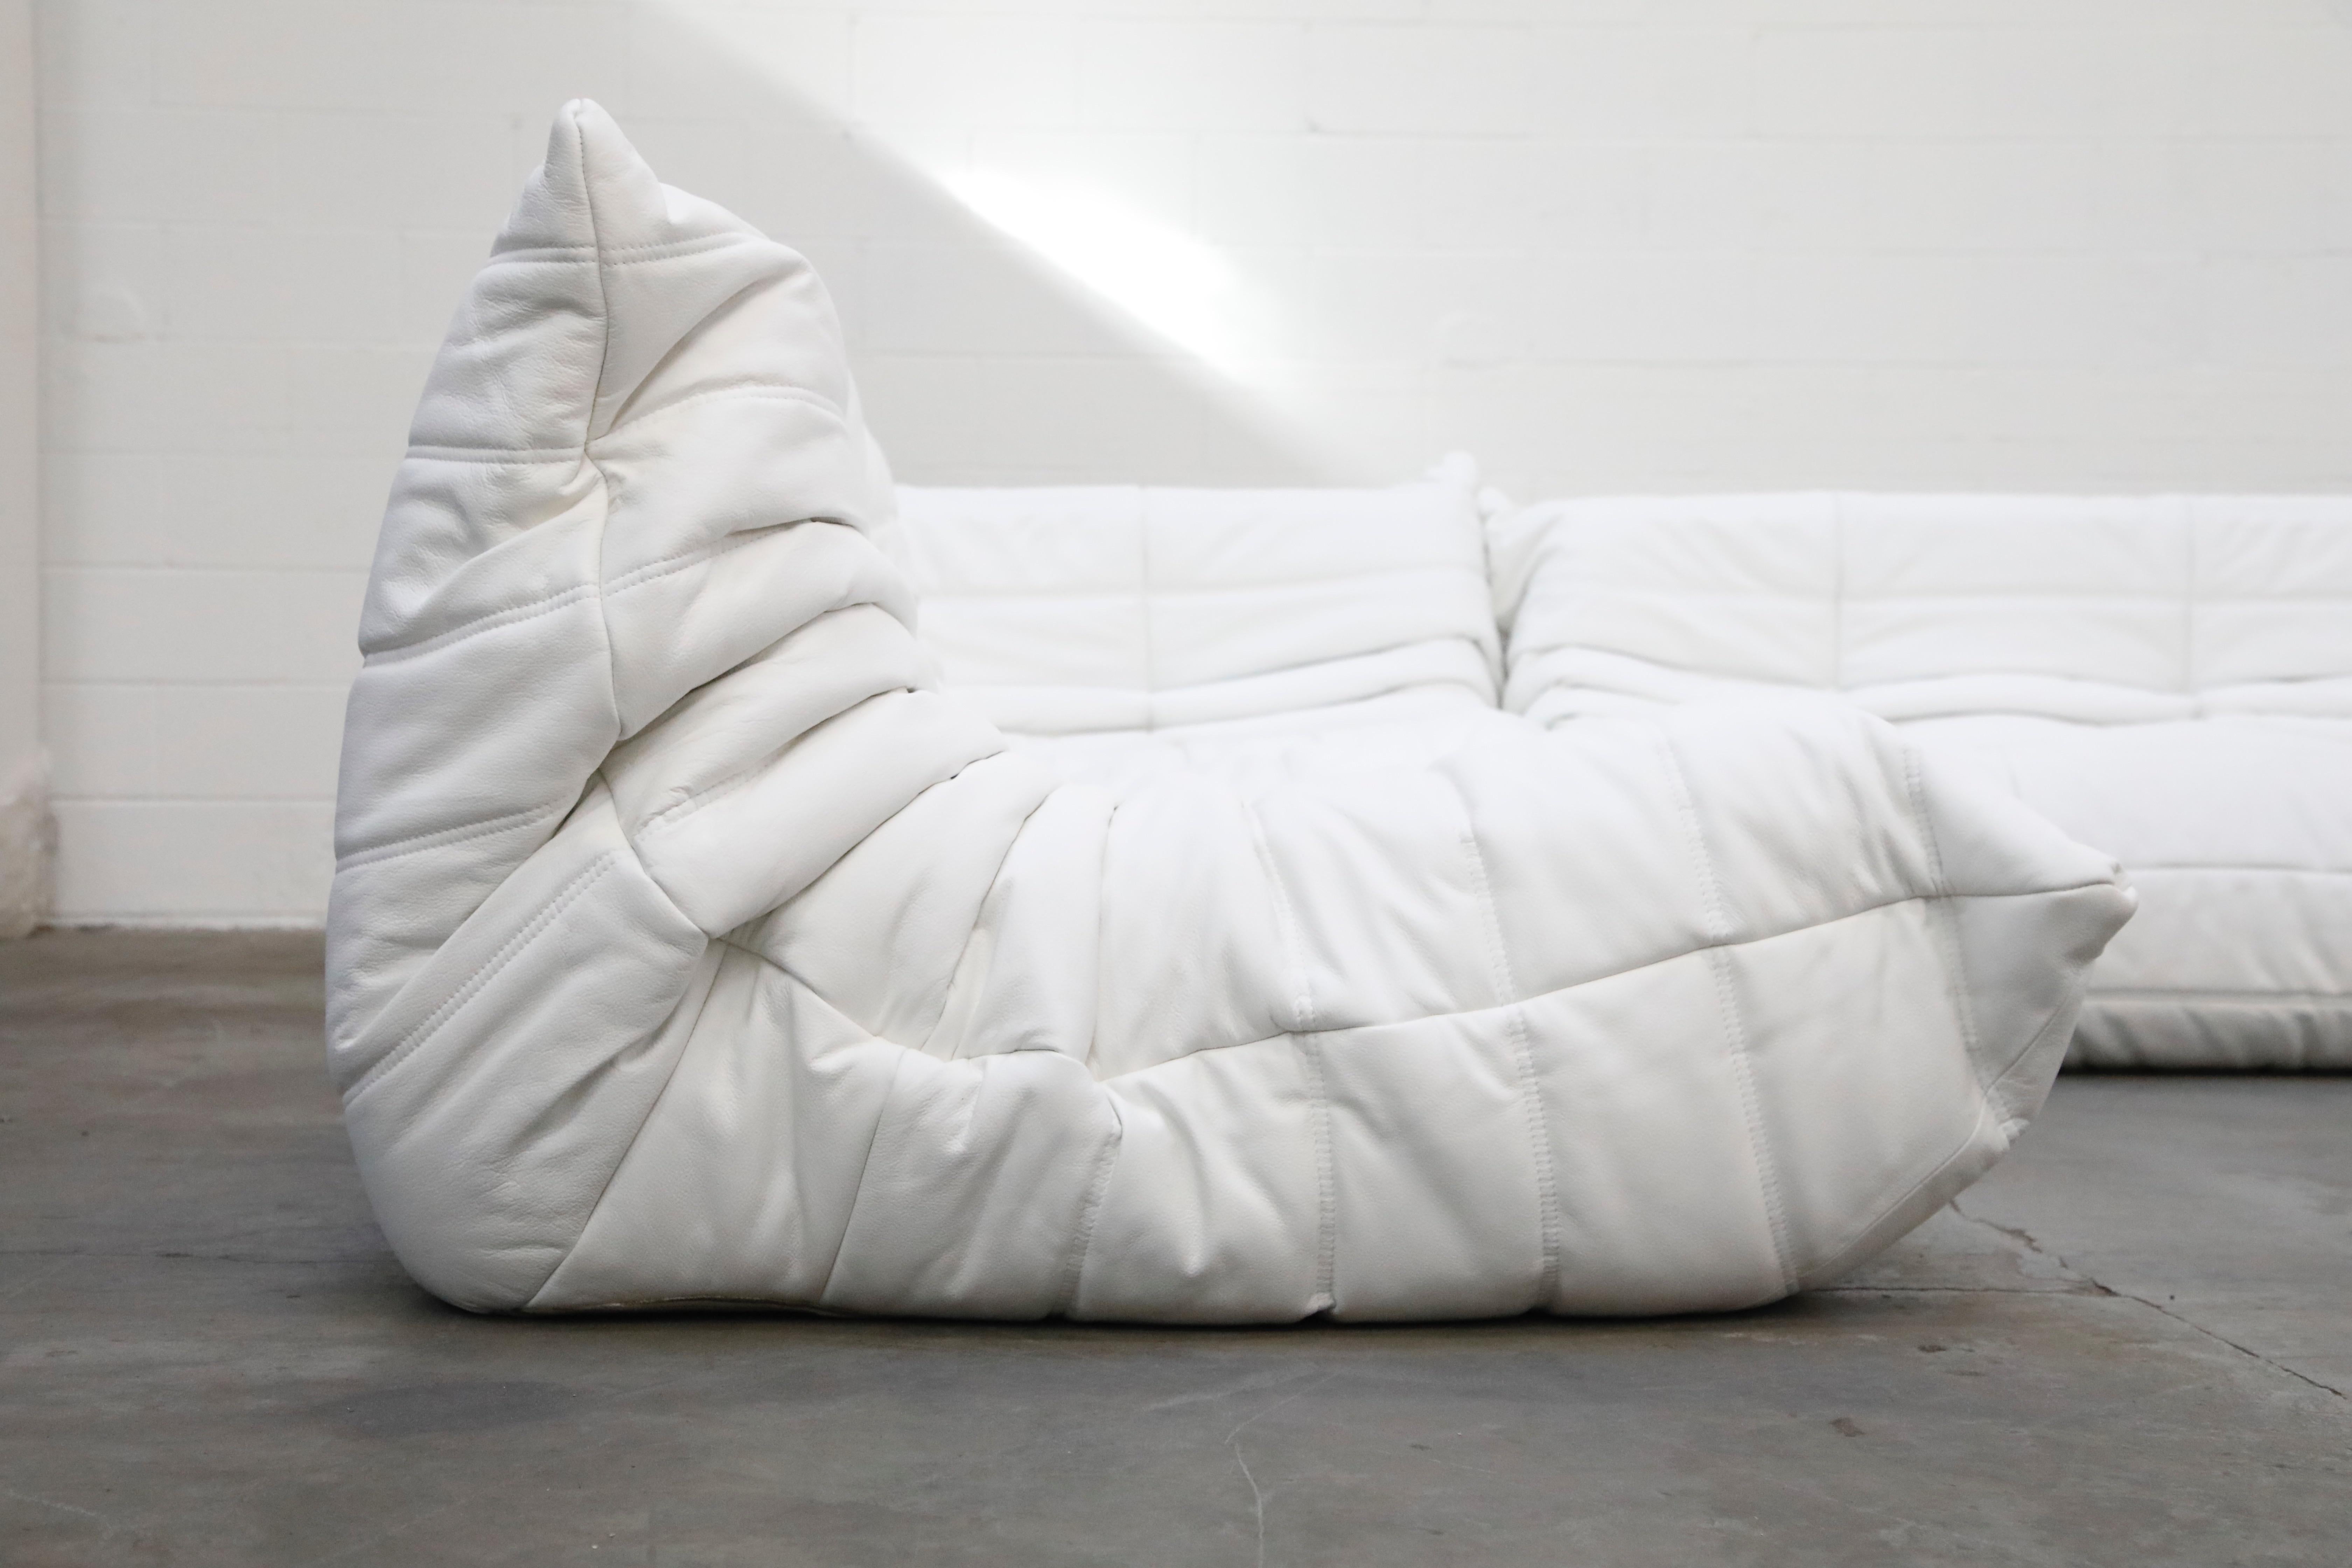 Contemporary White Leather 'Togo' Three-Piece Sofa by Michel Ducaroy for Ligne Roset, Signed